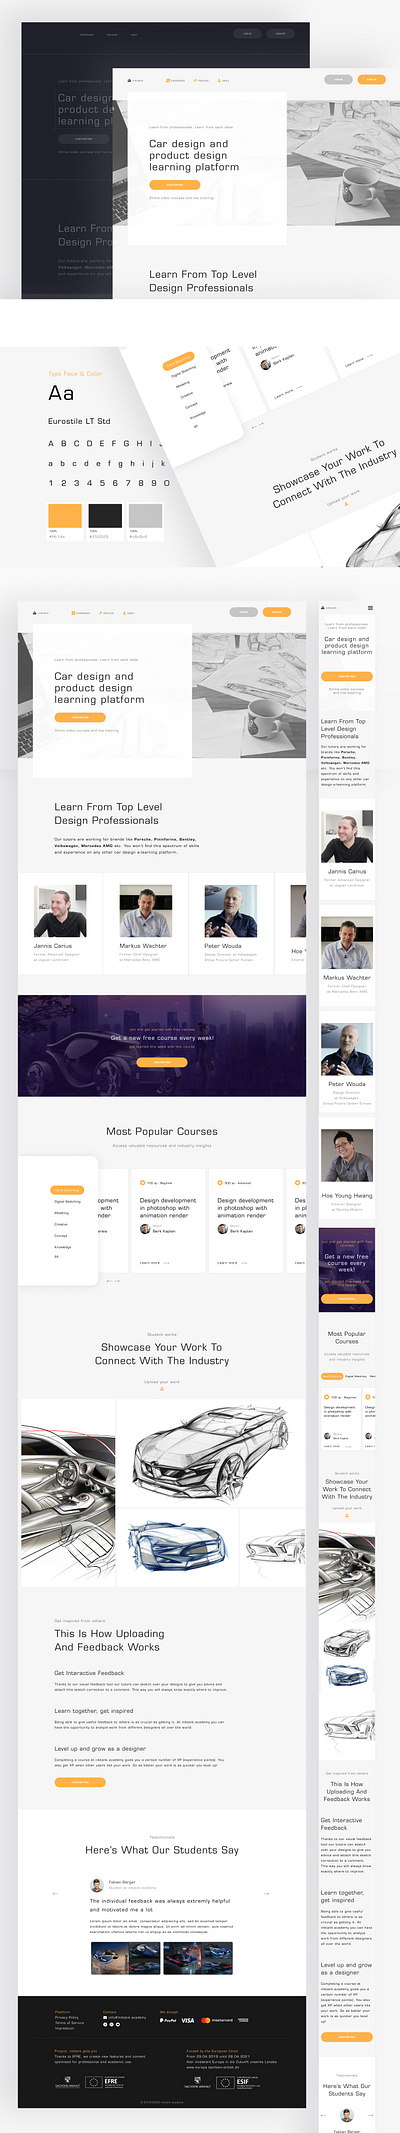 Car design and product design learning platform 3d car design conversio rate conversion rate design figma landing page design ux